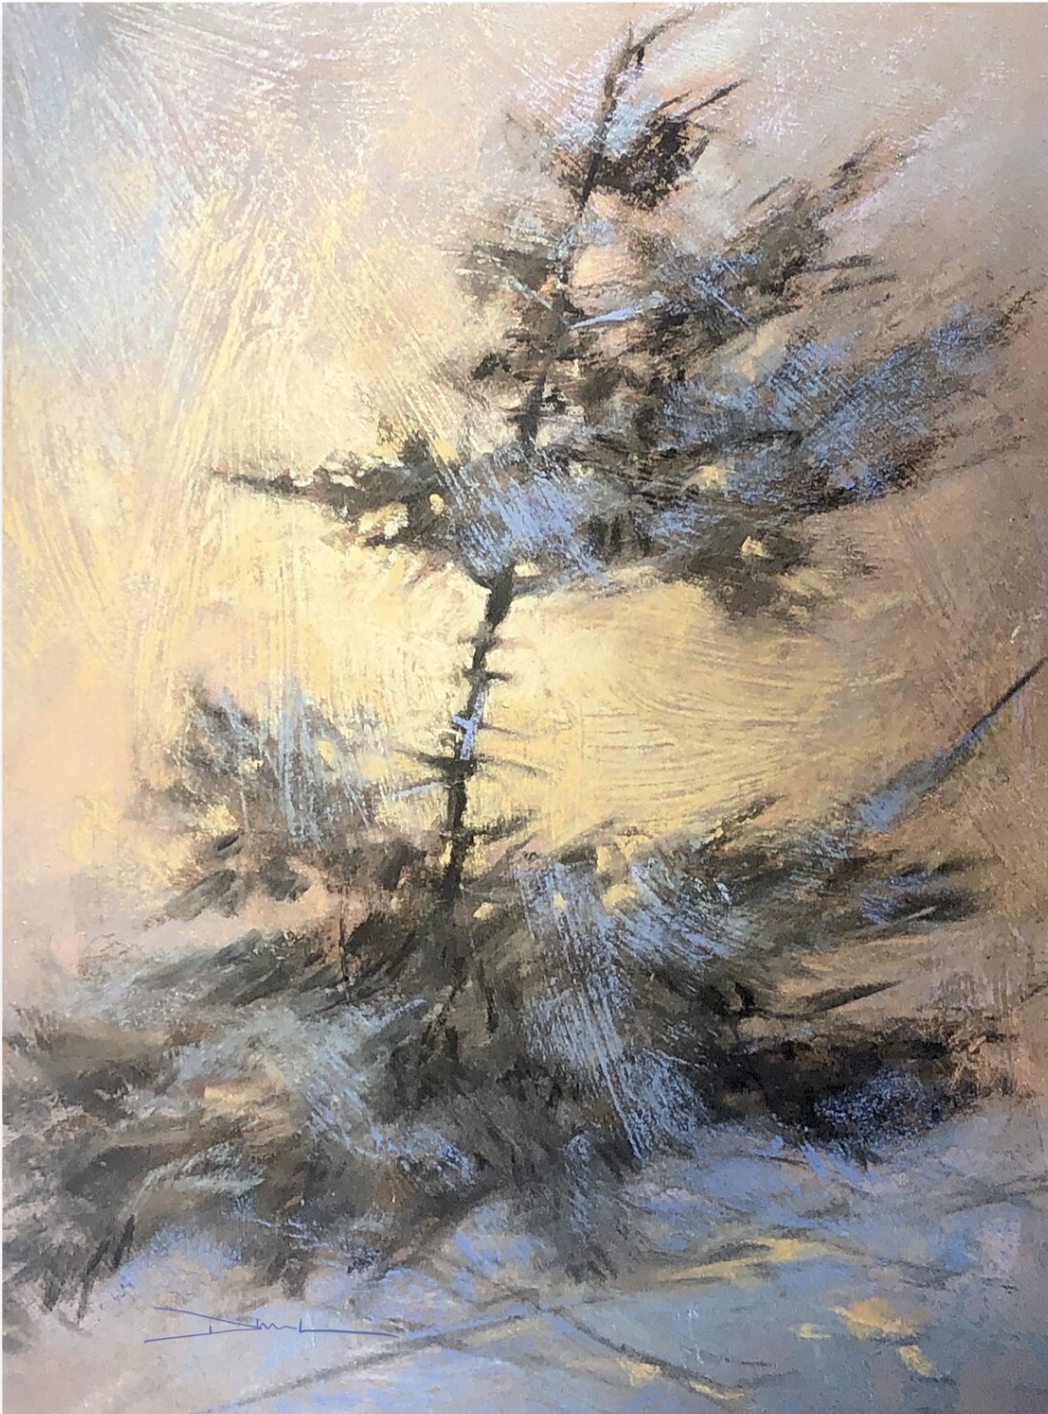 Warmth in Winter: Terrilyn Dubreuil, "Stalwart Glow," pastel, 12 x 9 in. Third Place